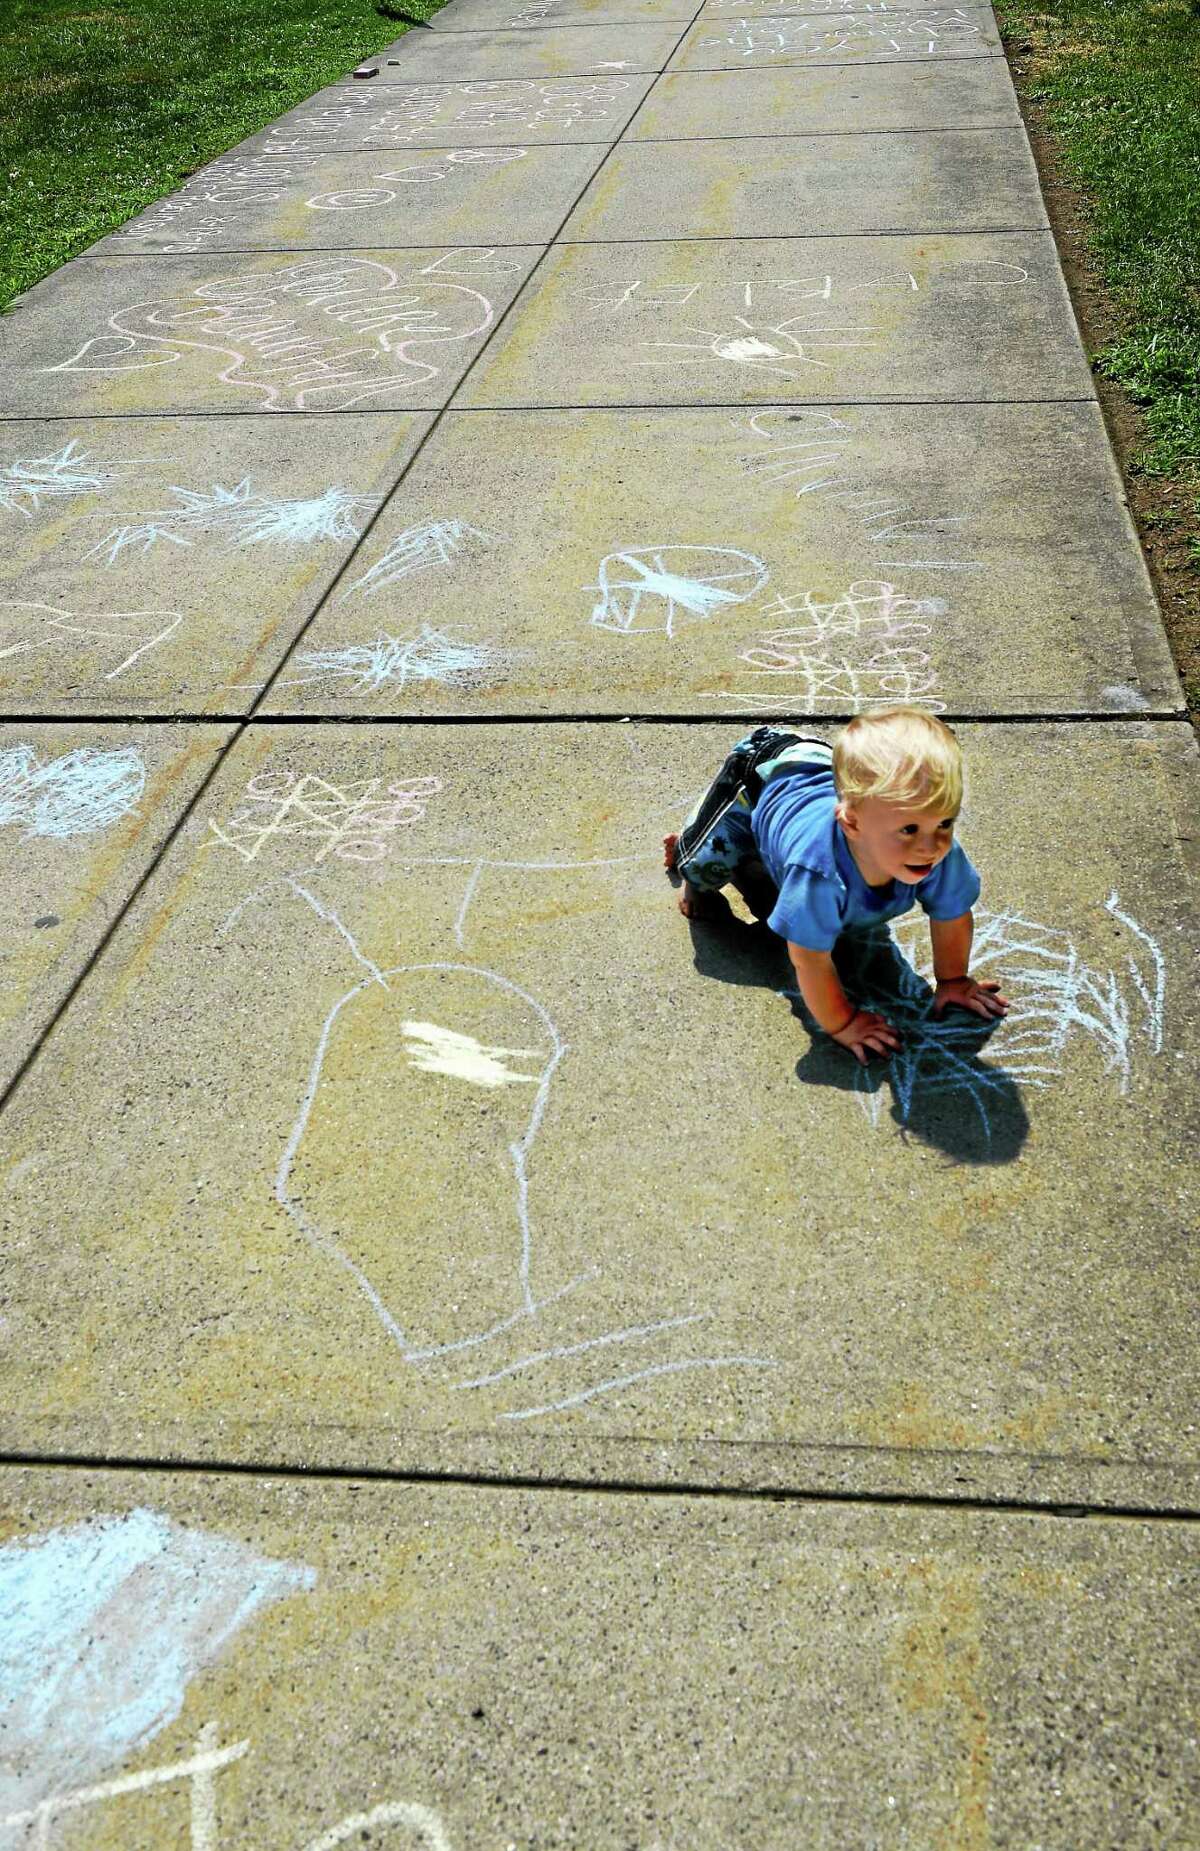 Tucker Blake, son of Milford Mayor Benjamin G. Blake, then 11 months, in front of Milford City Hall during Milford’s participation in Chalk the Walks 2015.